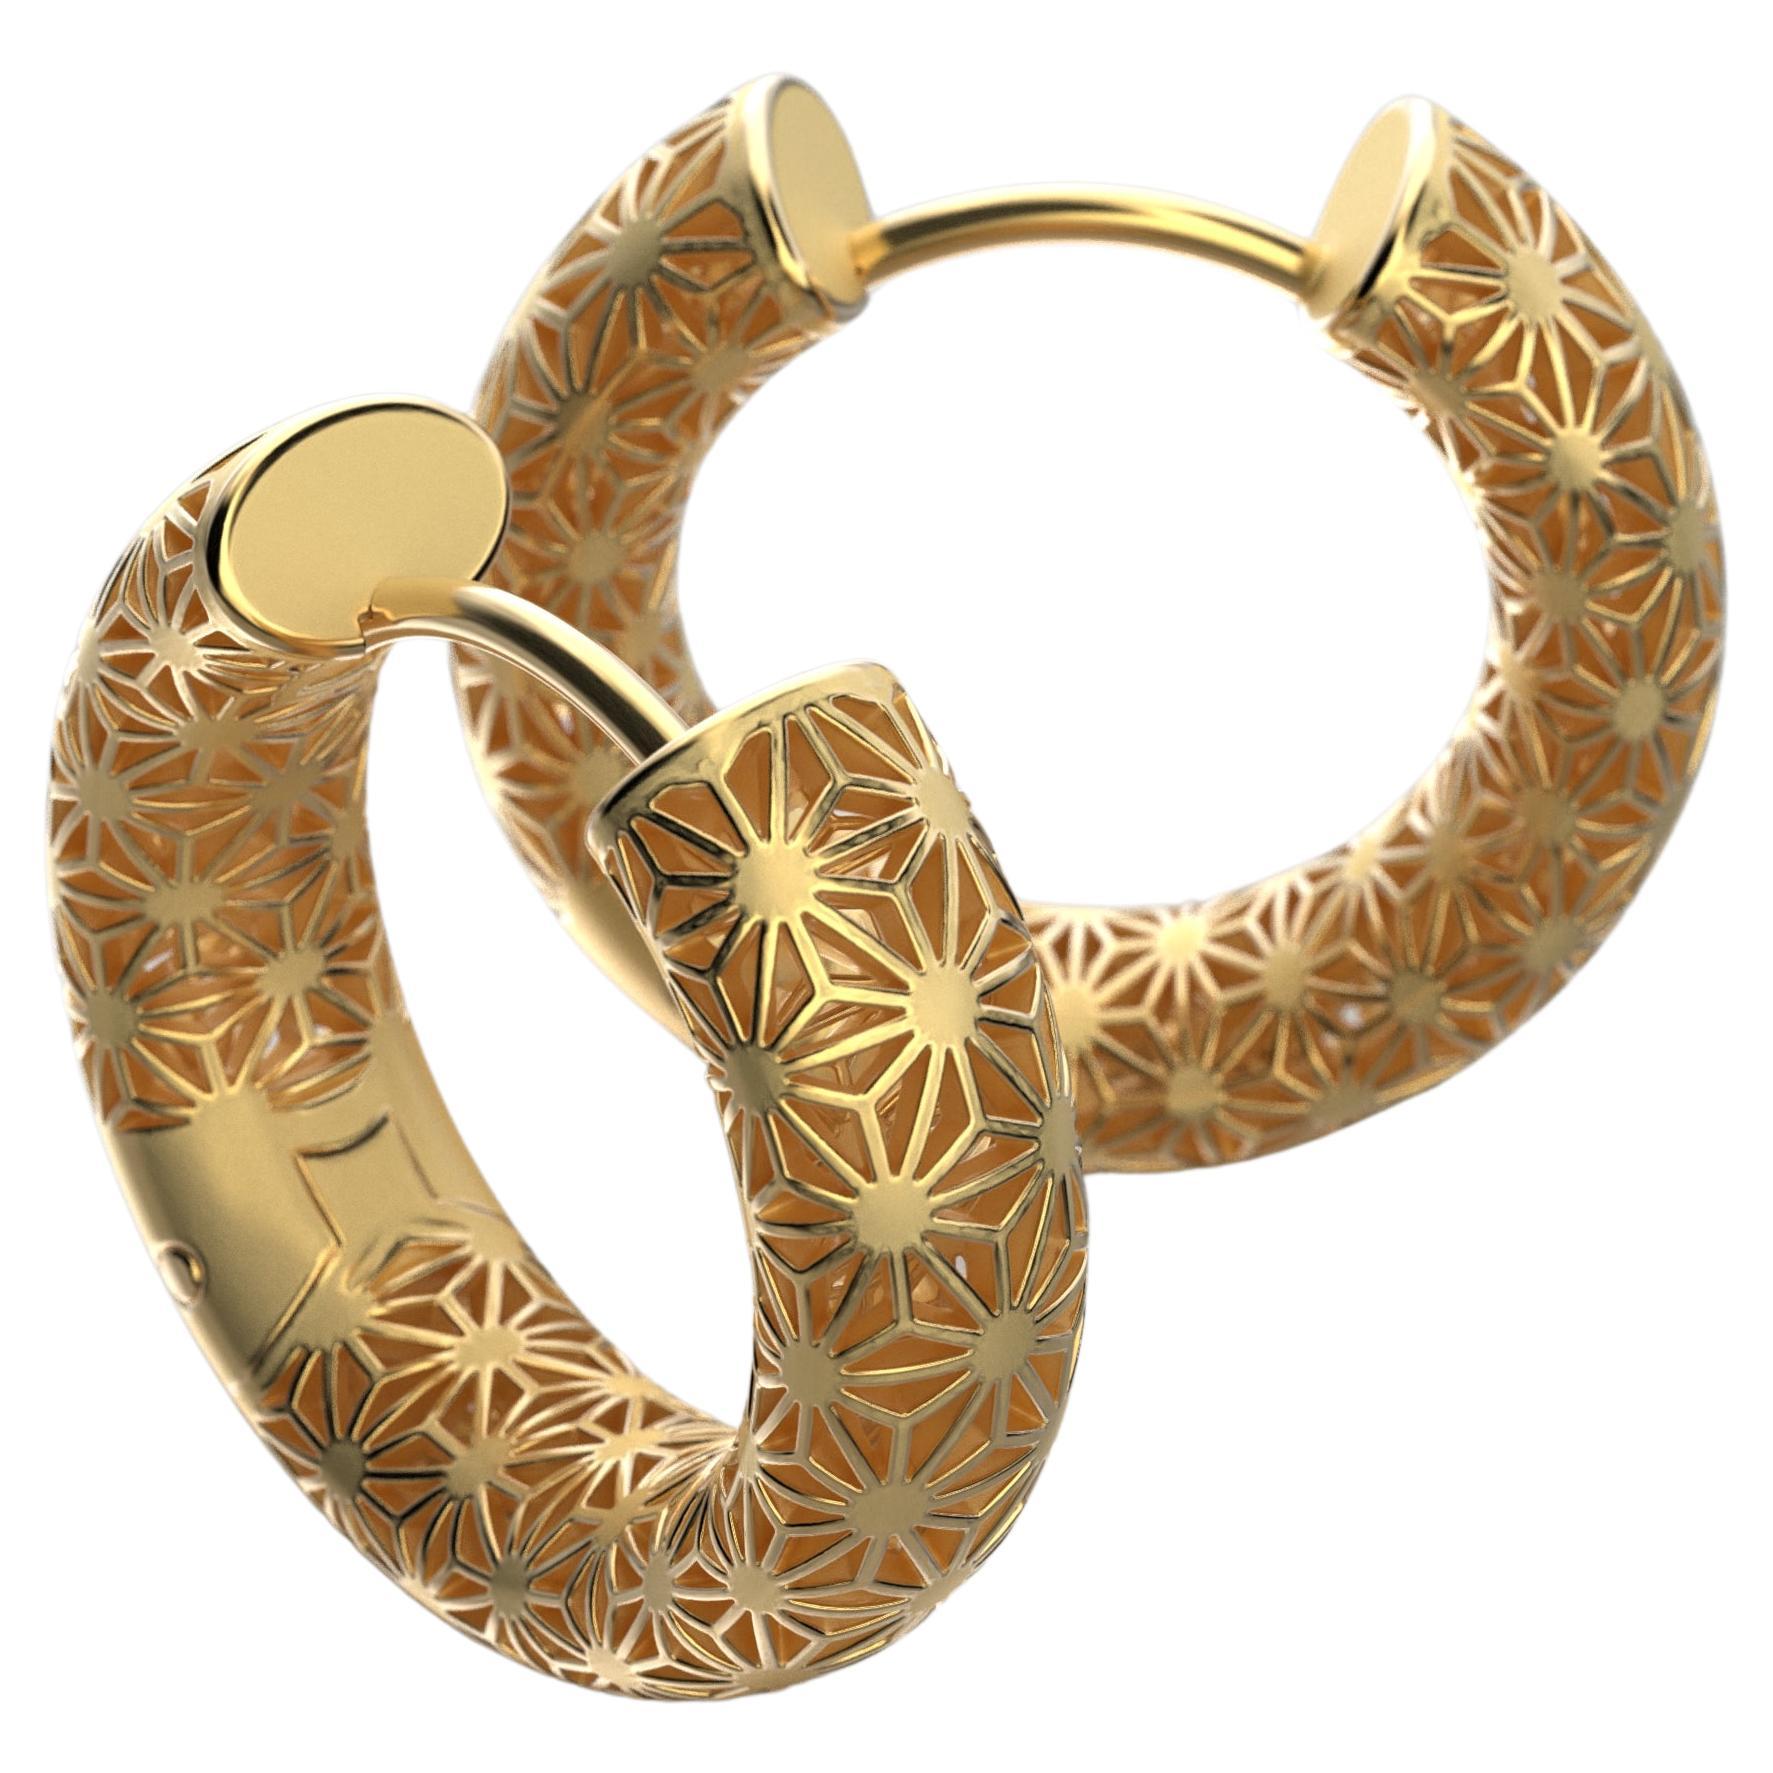 Experience timeless elegance with our only made to order meticulously crafted Italian Gold Hoop Earrings. Handcrafted in Italy, each hoop features a delicate Sashiko pattern design inspired by Japanese embroidery, adding an artistic flair to your